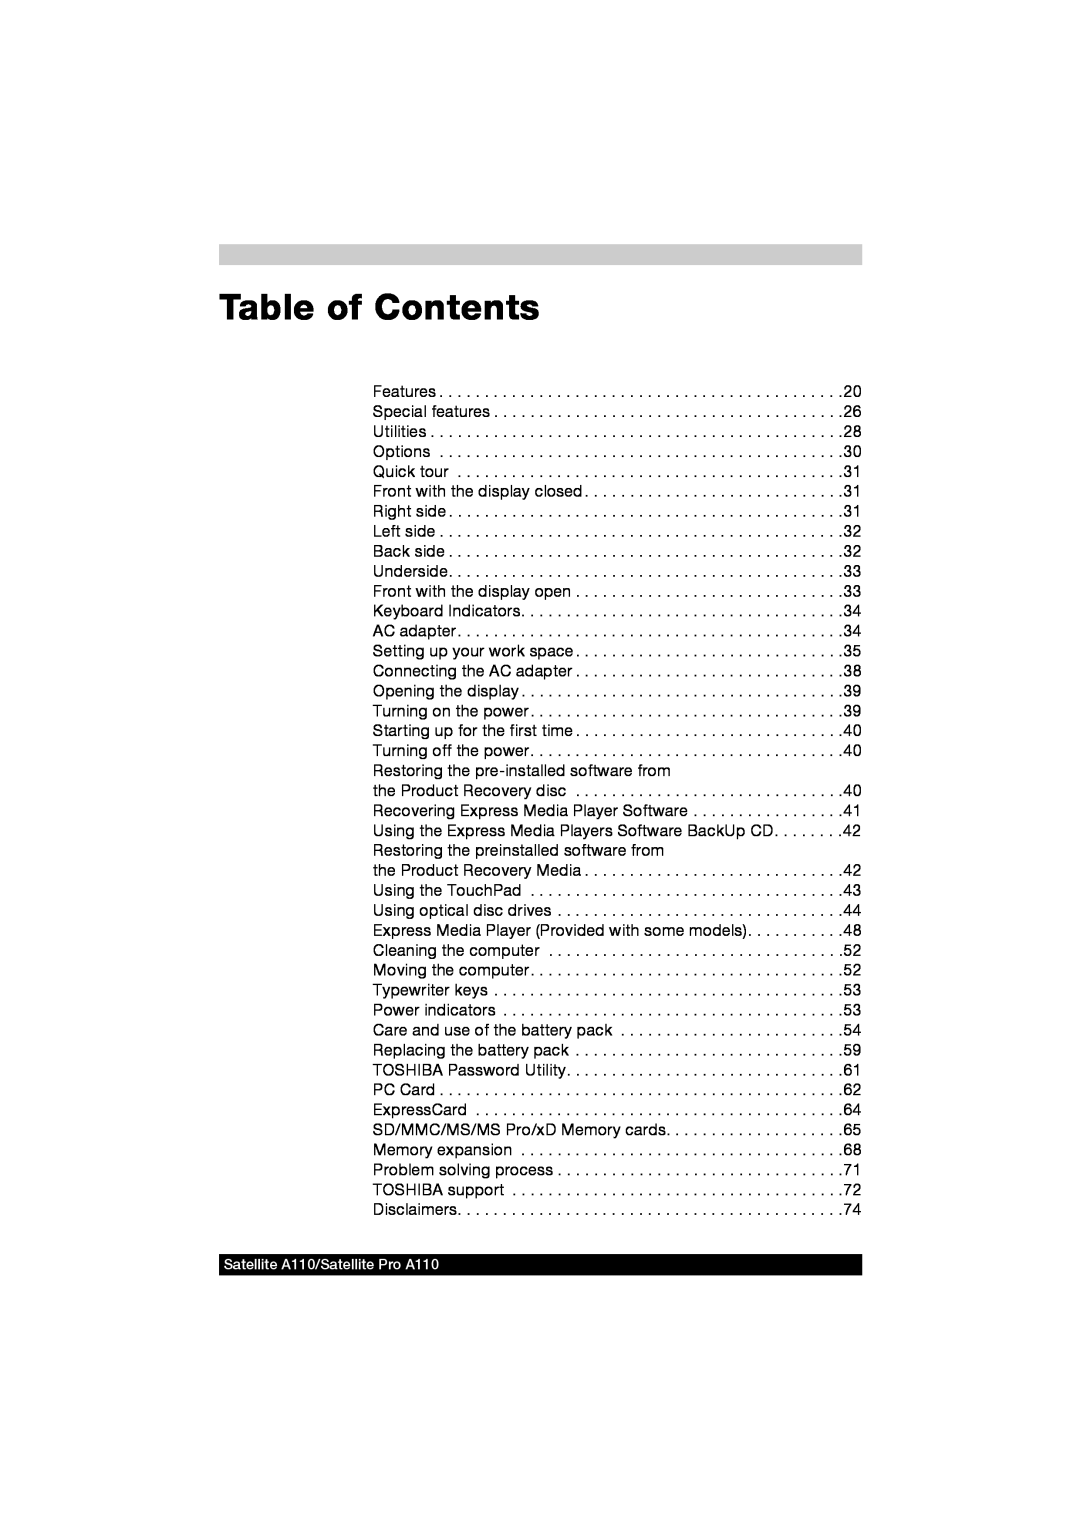 Toshiba user manual Table of Contents, Satellite A110/Satellite Pro A110 